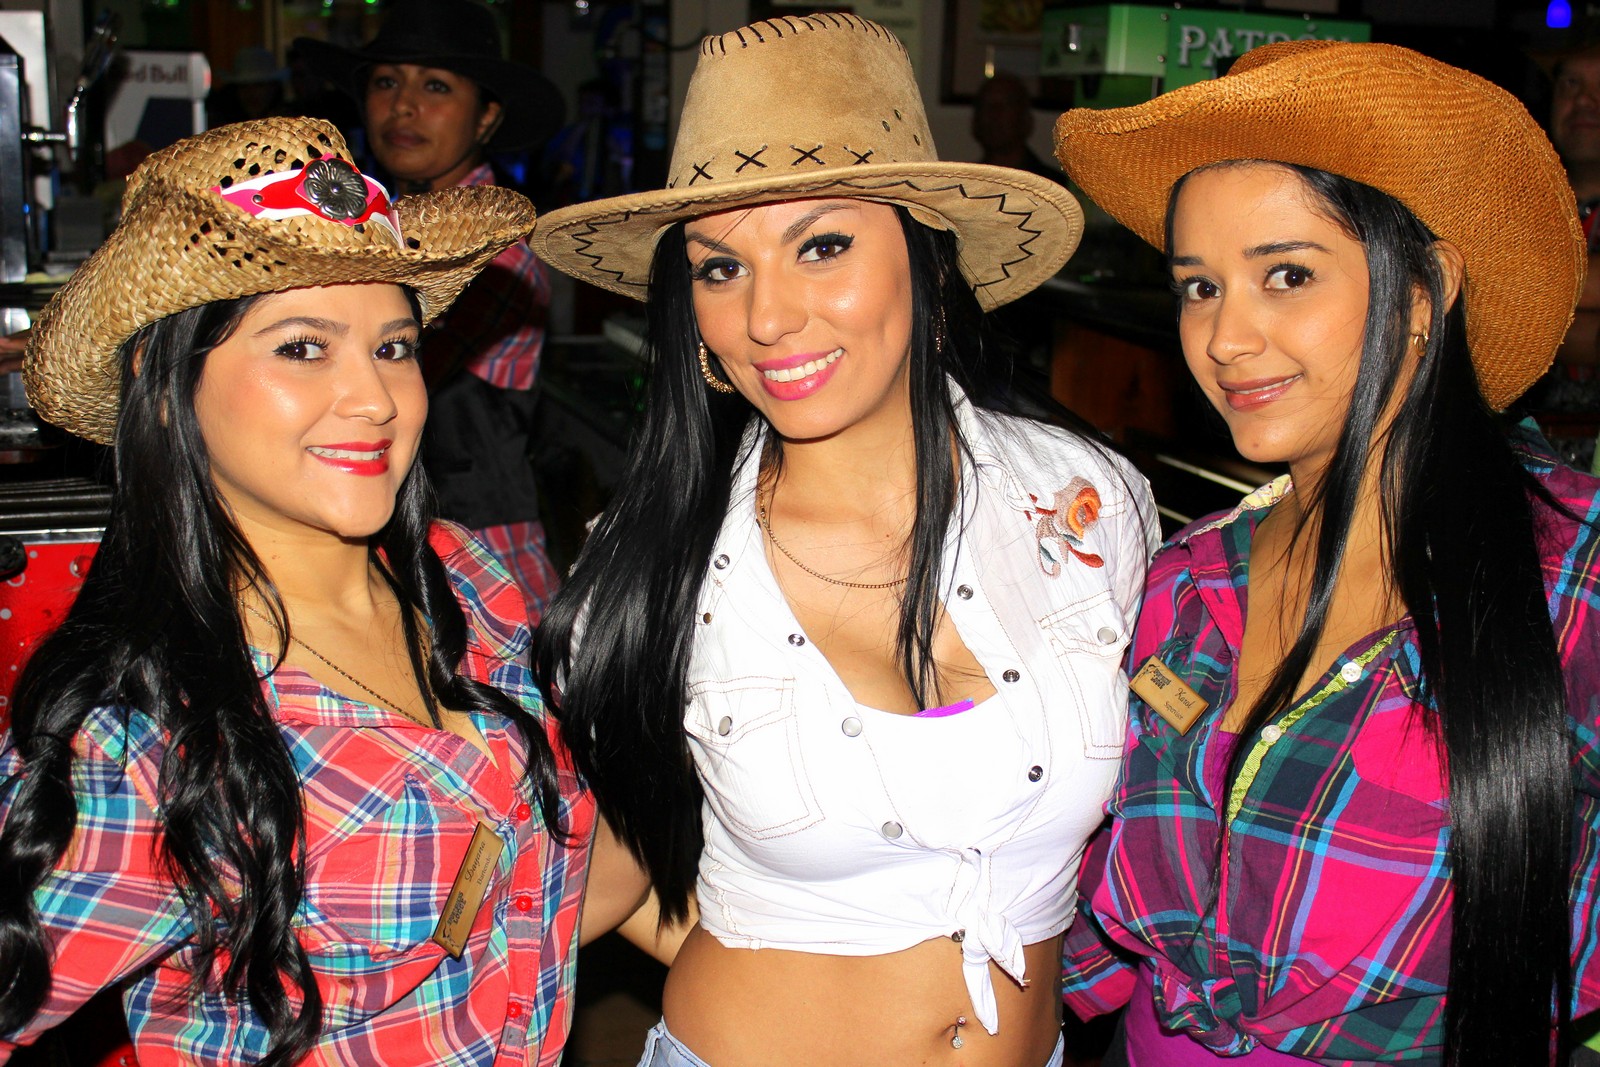 Cowboy Night at the Sportsmens Lodge | Costa Rica Ticas